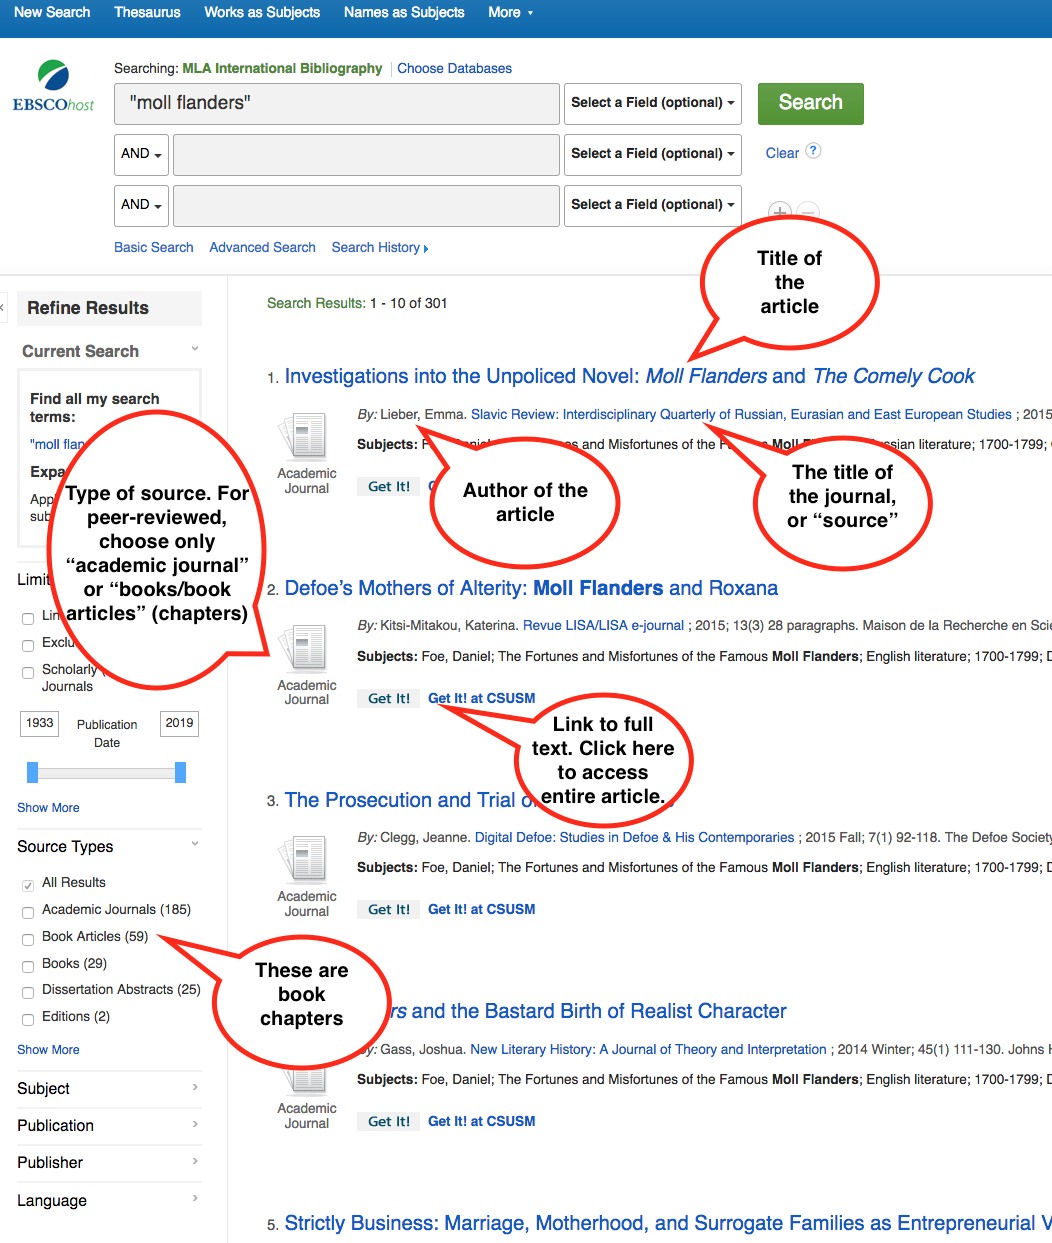 Annotated screenshot of an MLA International Bibliography search results page for search terms "moll flanders"